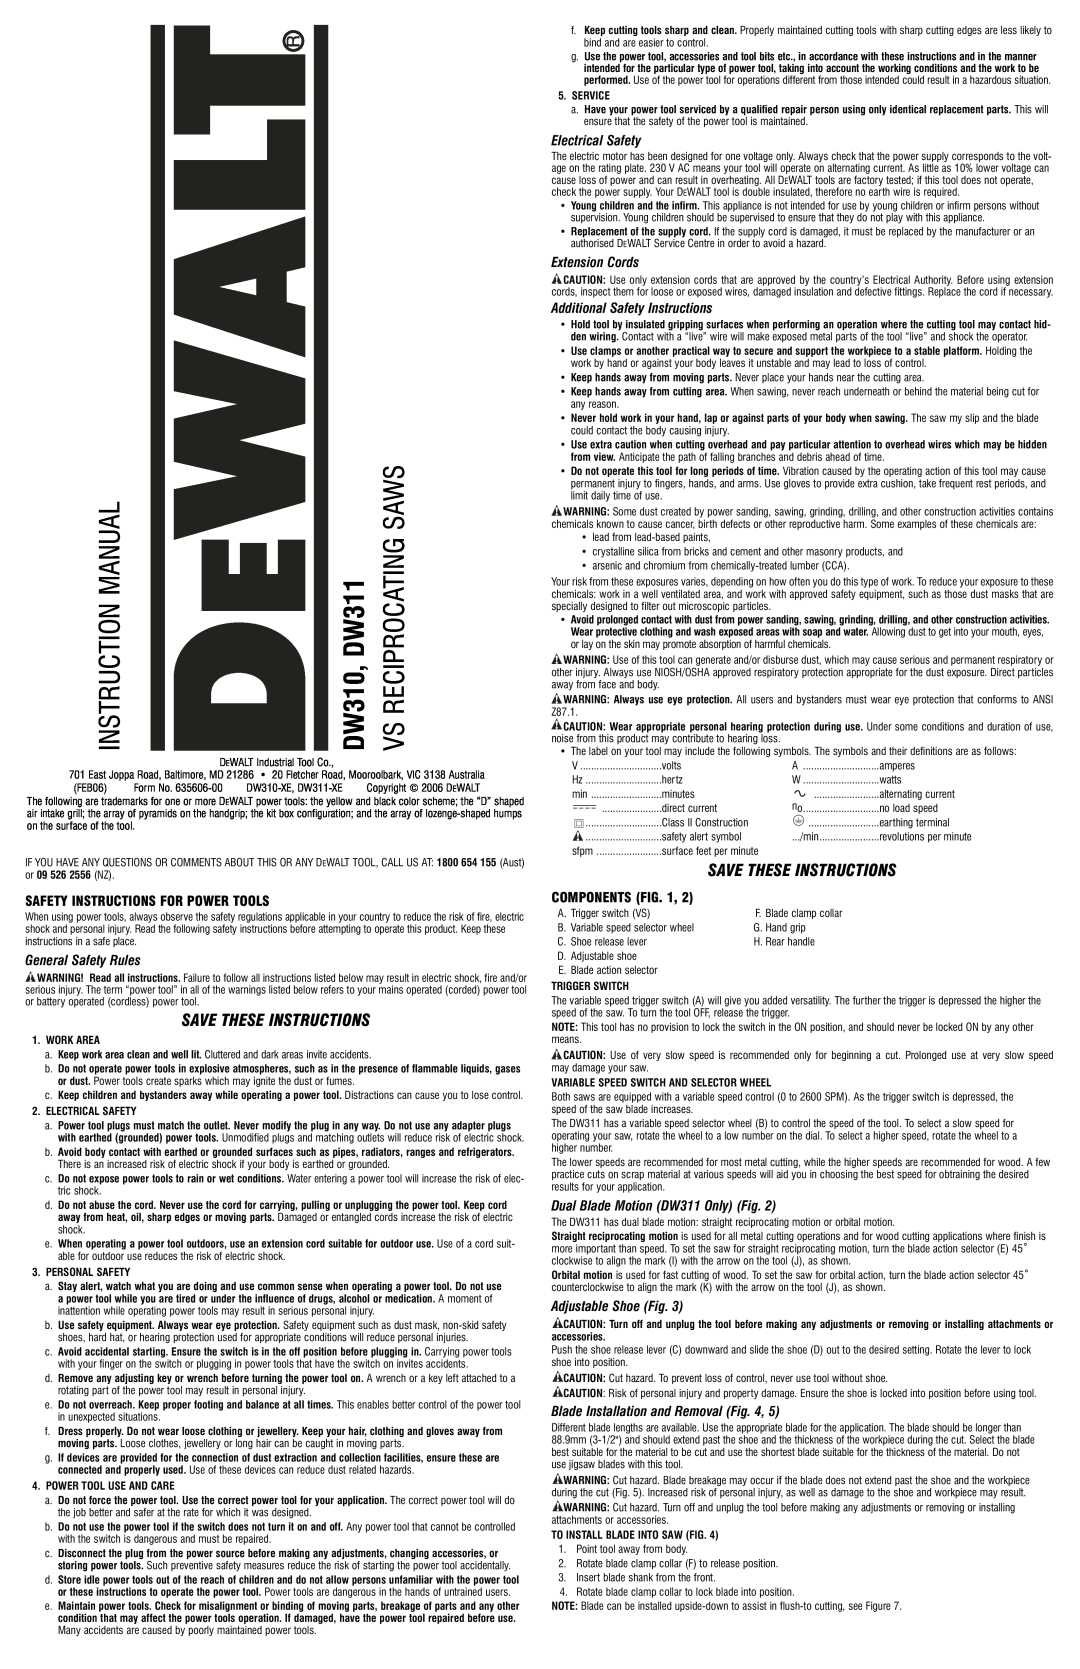 DeWalt DW311K instruction manual Safety Instructions For Power Tools, General Safety Rules, Electrical Safety, Components 